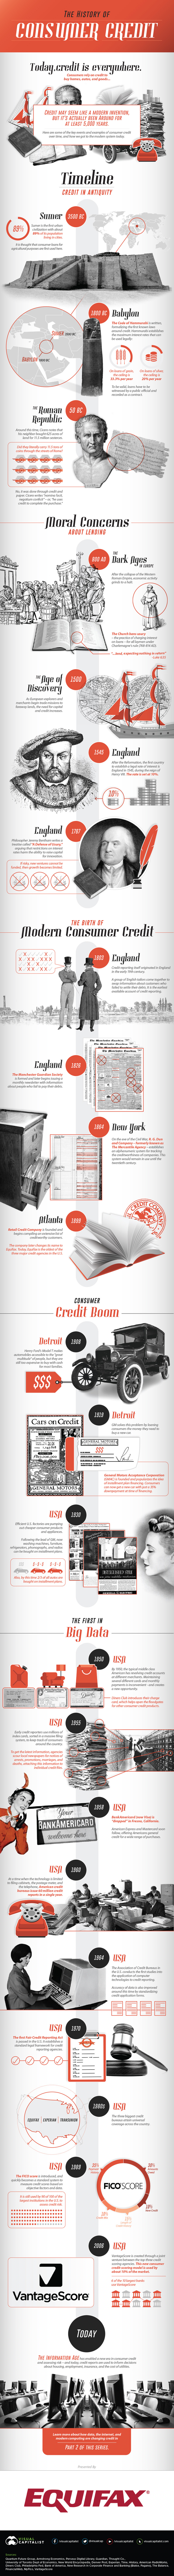 The History of Consumer Credit in One Giant Infographic